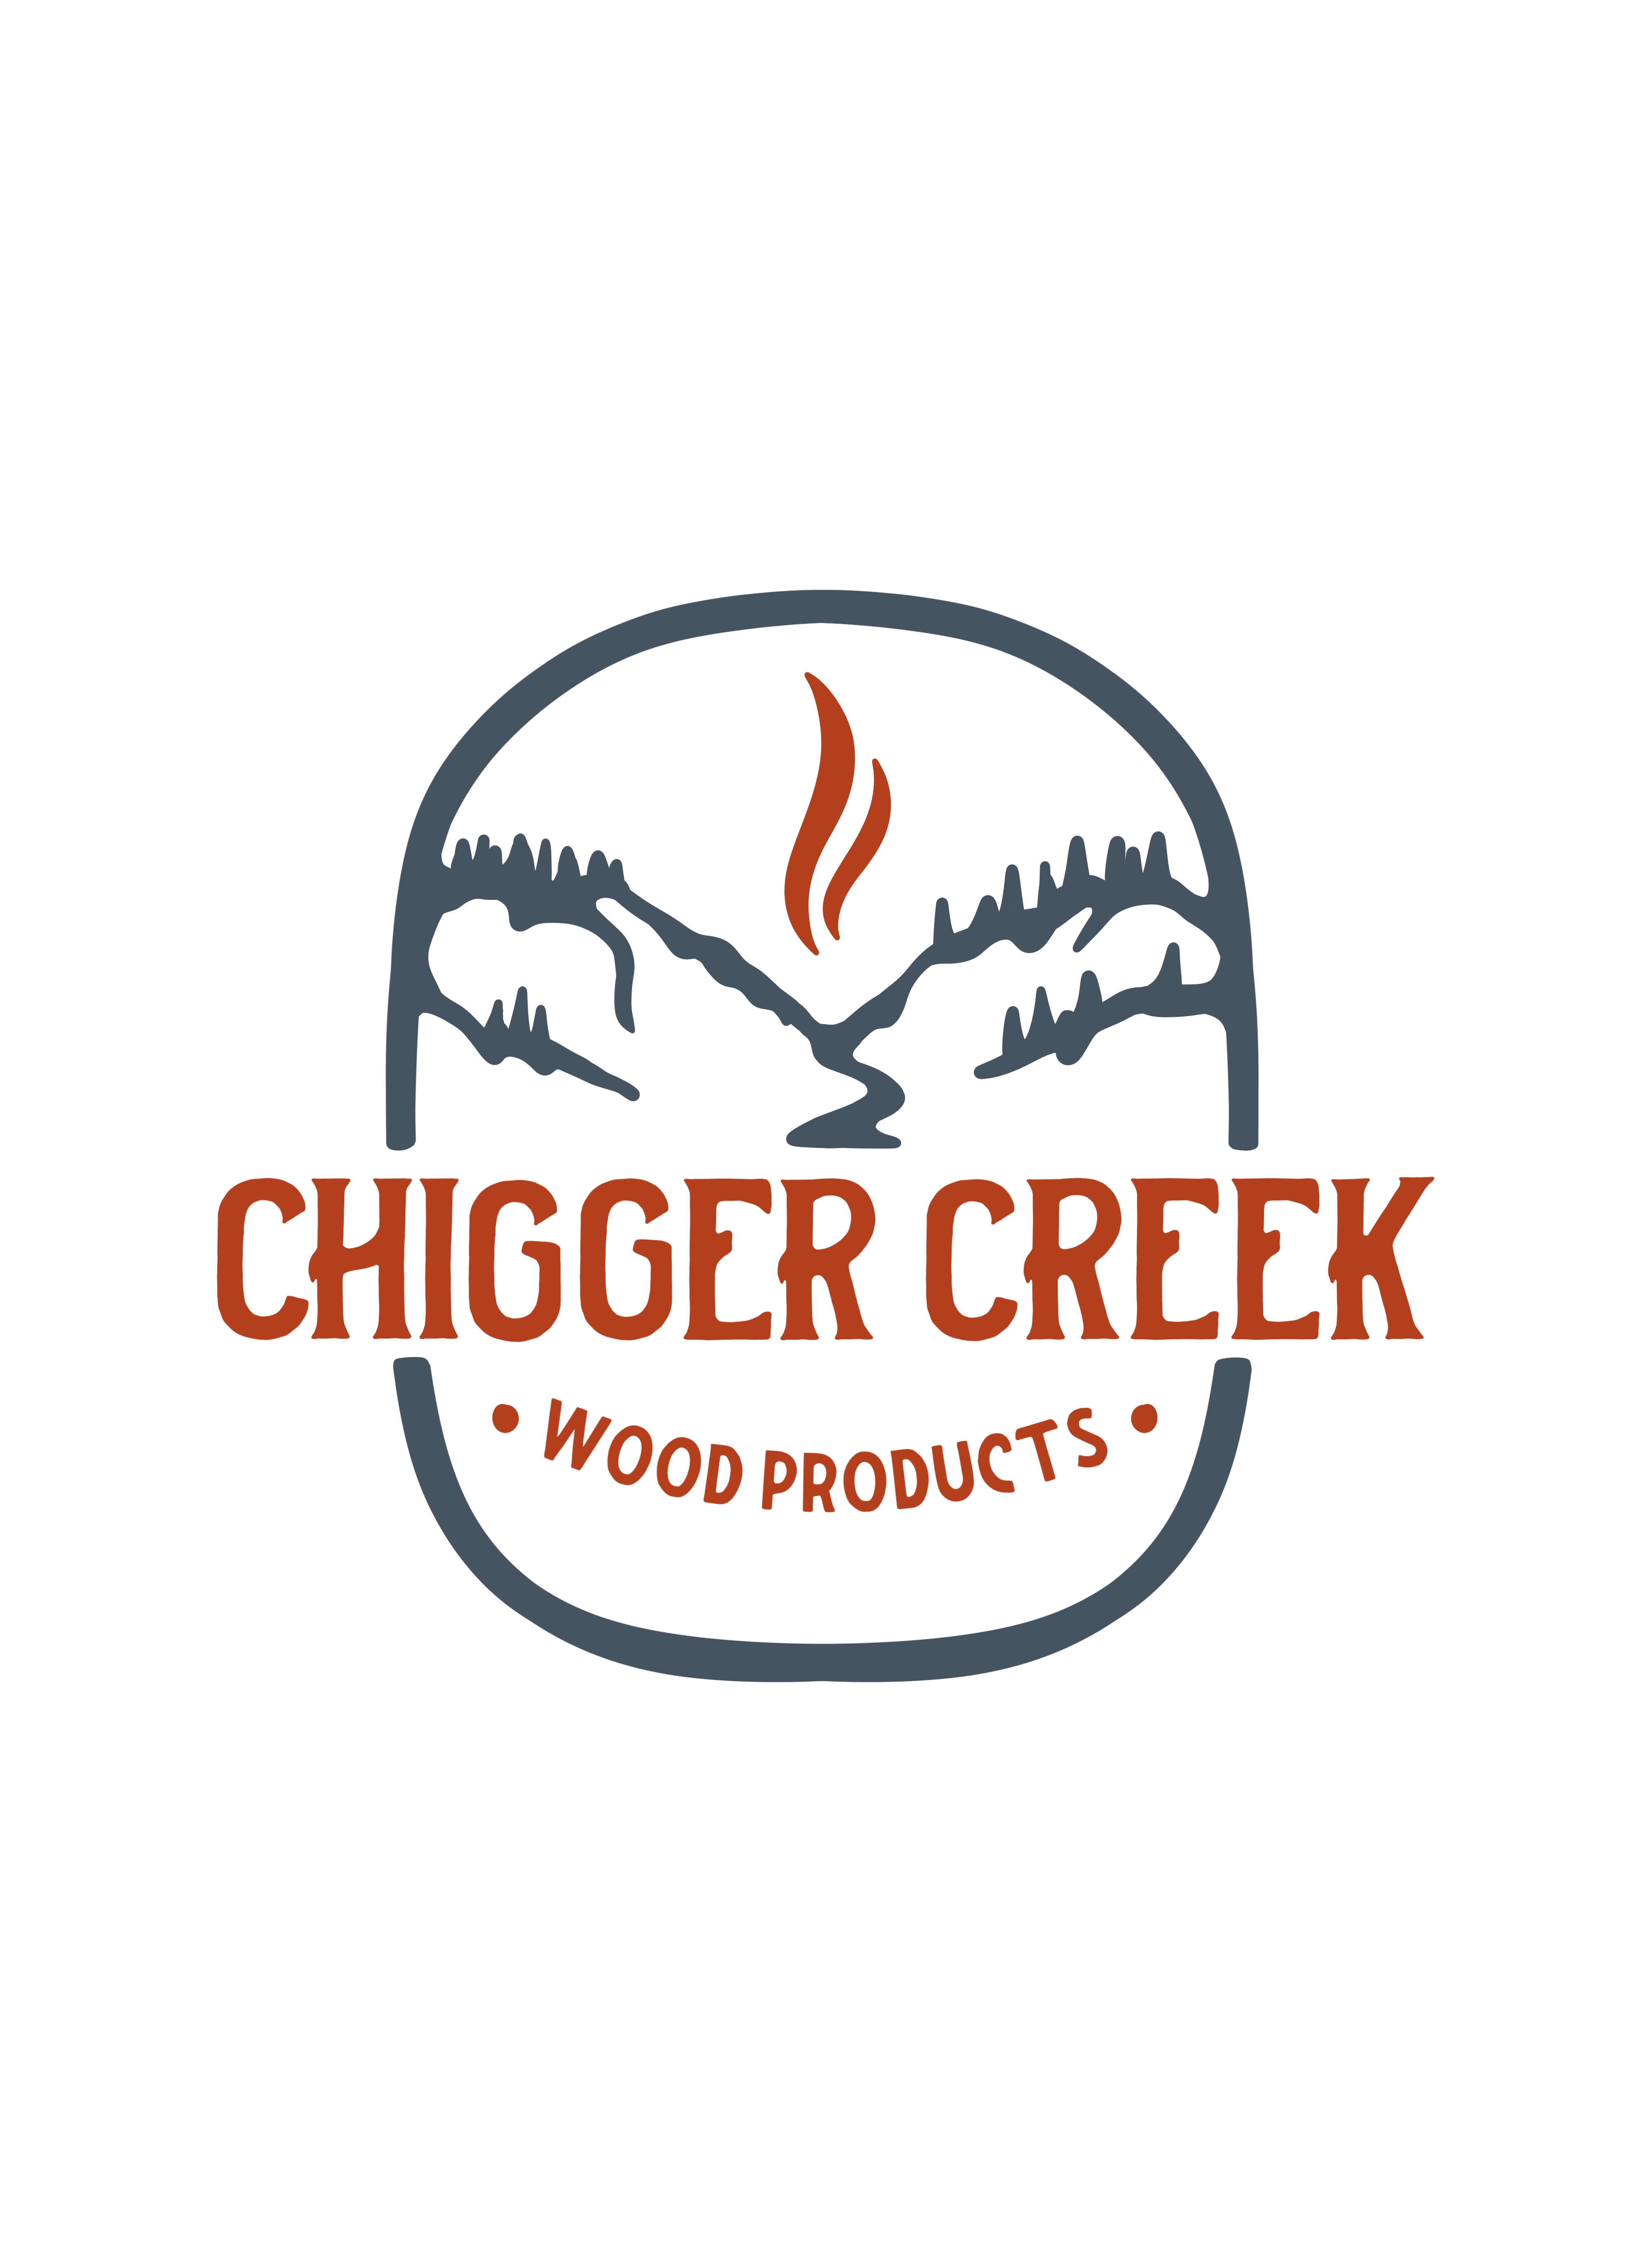 Products - Chigger Creek Wood Products